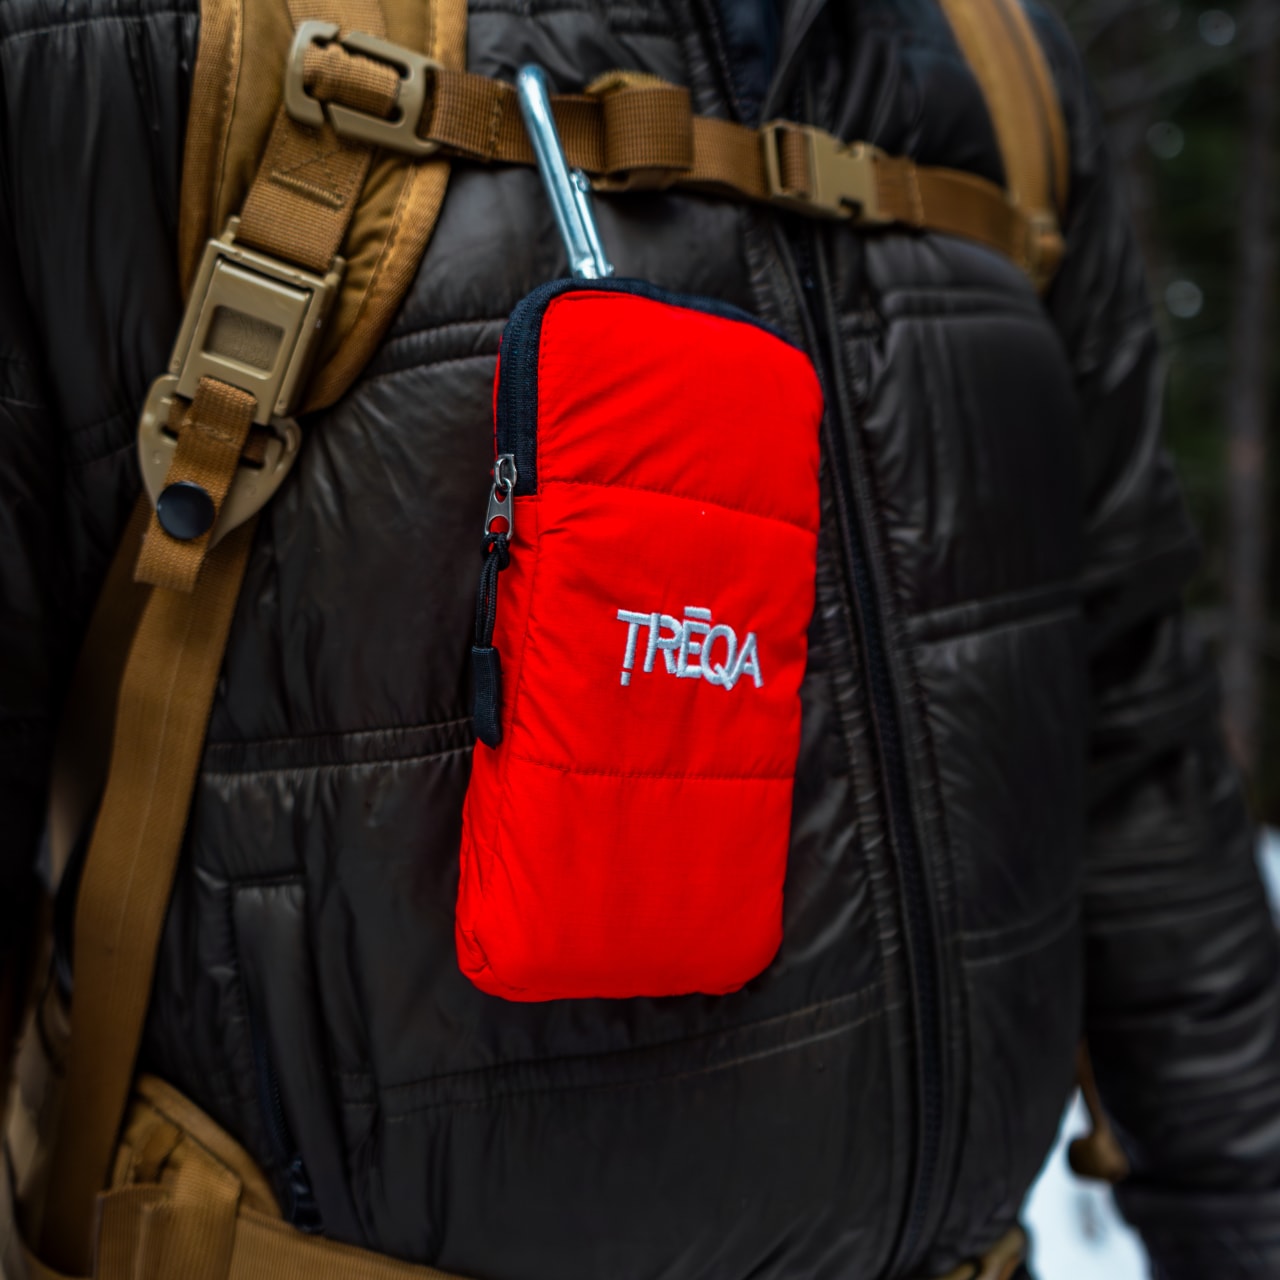 TREQA - Arctic Thermal Phone Case - Red - Clipped to Backpack Strap